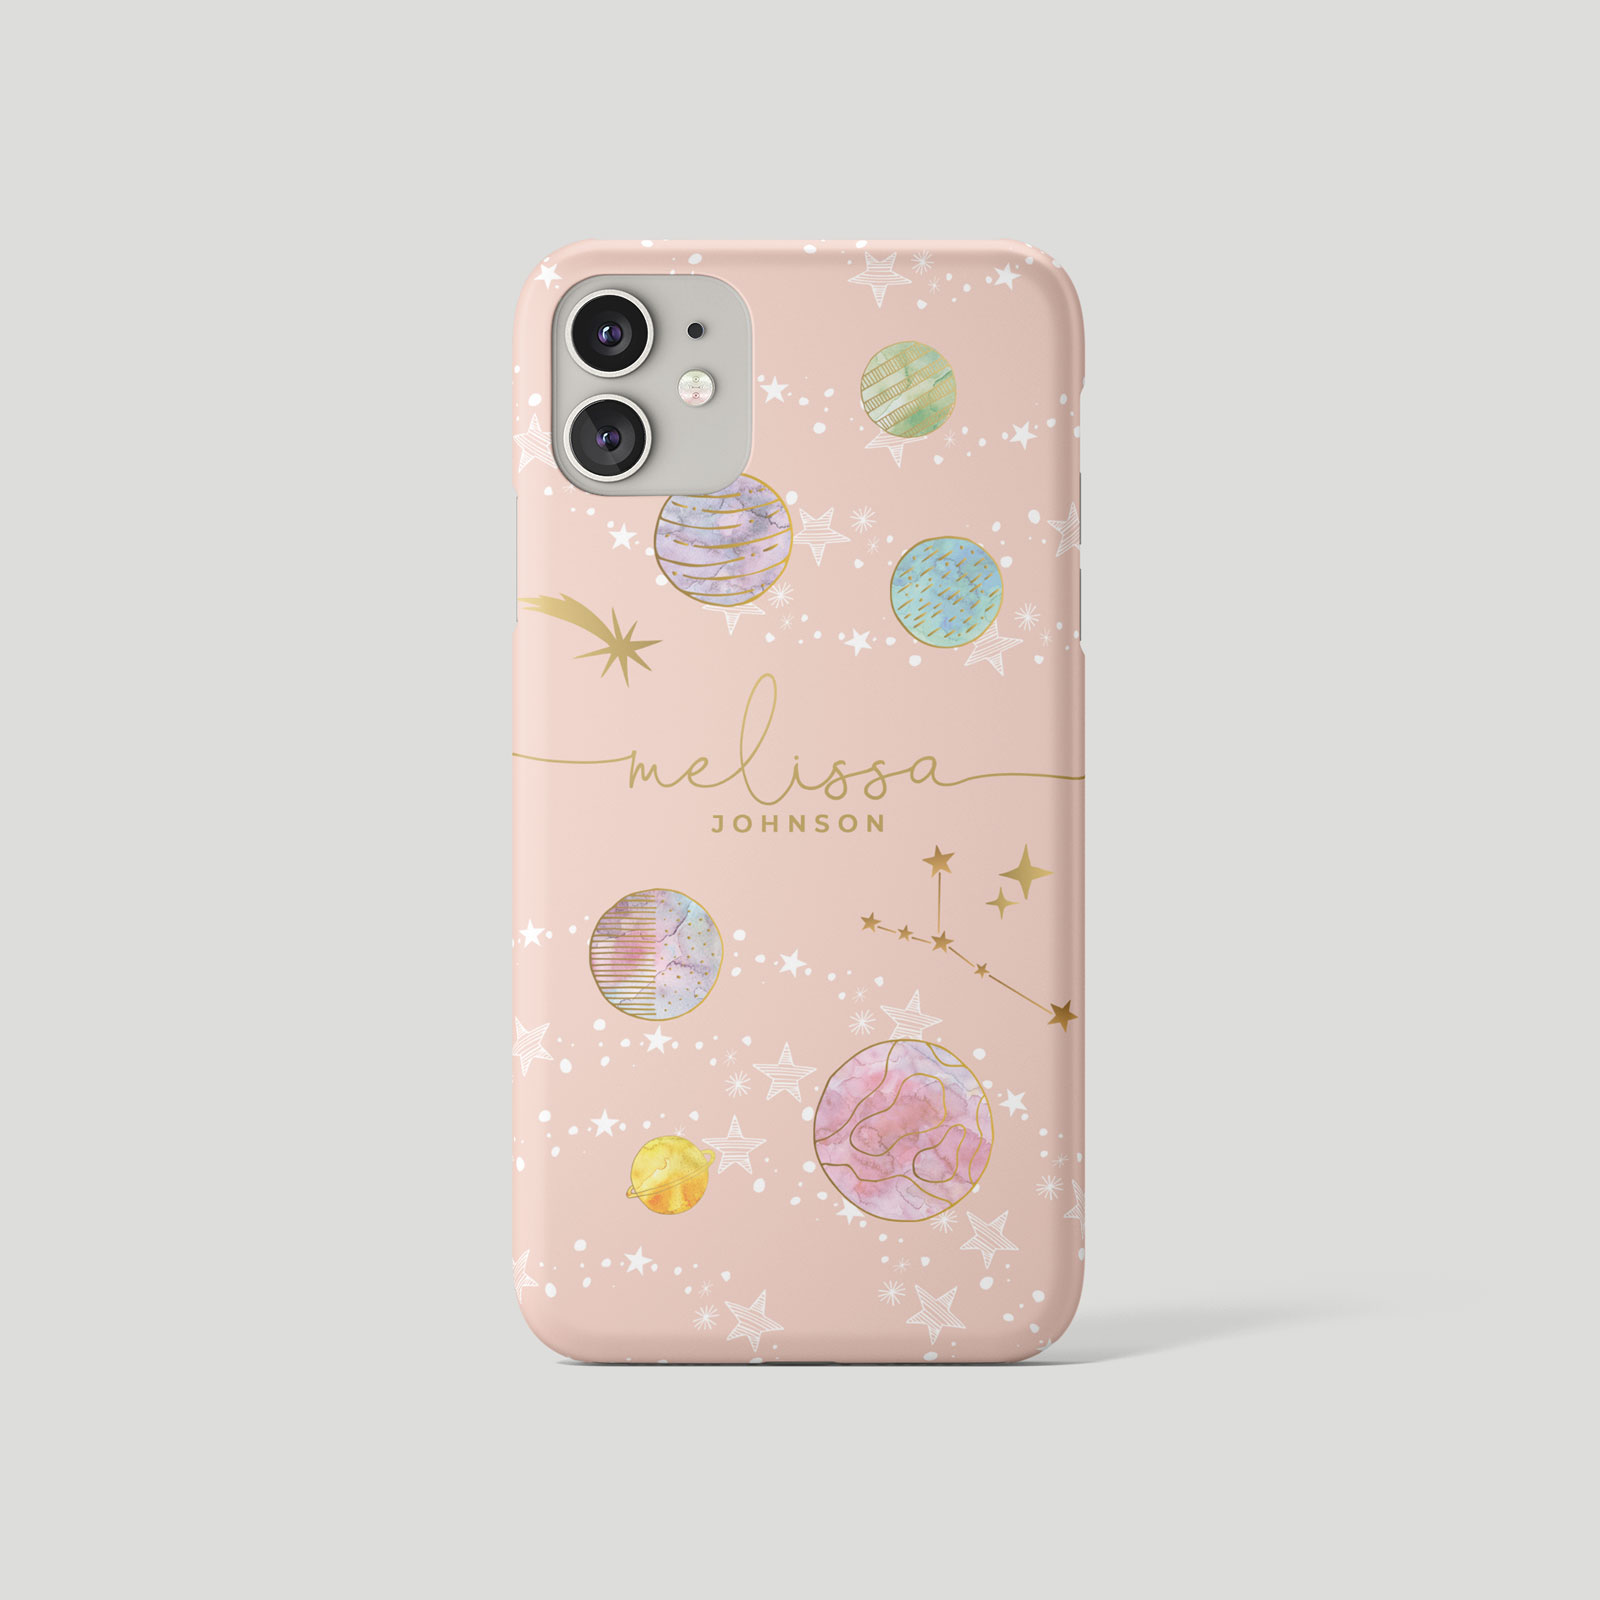 Tirita Personalised Initials Custom Hard Phone Case Compatible with iPhone 11 PRINTED GLITTER NOT REAL GLITTER Space Stars Moon Planets Turquoise Marbled